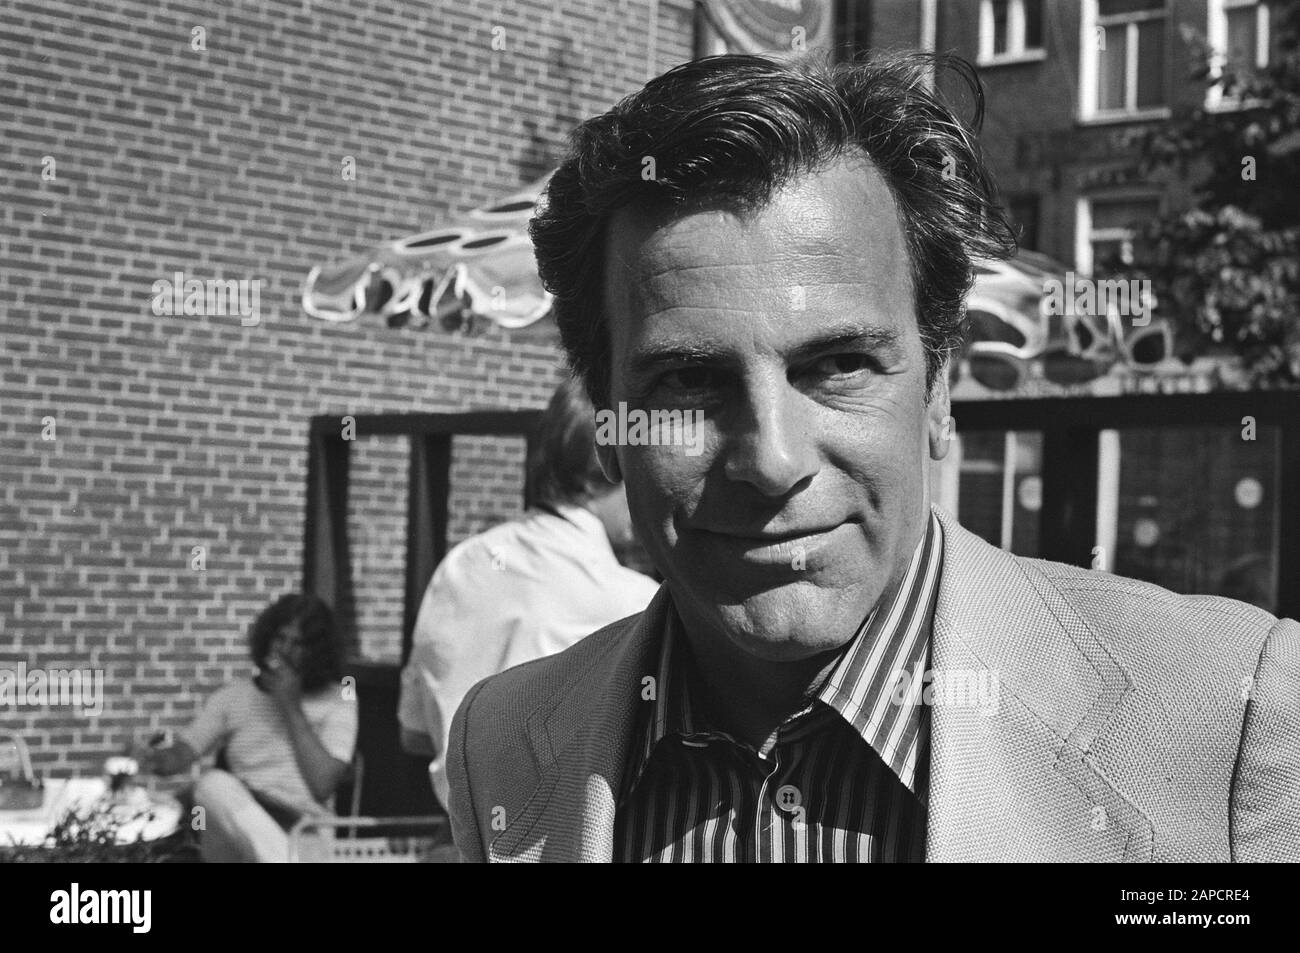 Actor Maximilian Schell in a Brug to Ver, gives press conference in, left producer Levine, right Schell with boot beer Date: June 13, 1976 Location: Amsterdam, Noord-Holland Keywords: actors, films, movie stars, press conferences, portraits Personal name: Schell Maximilian Stock Photo